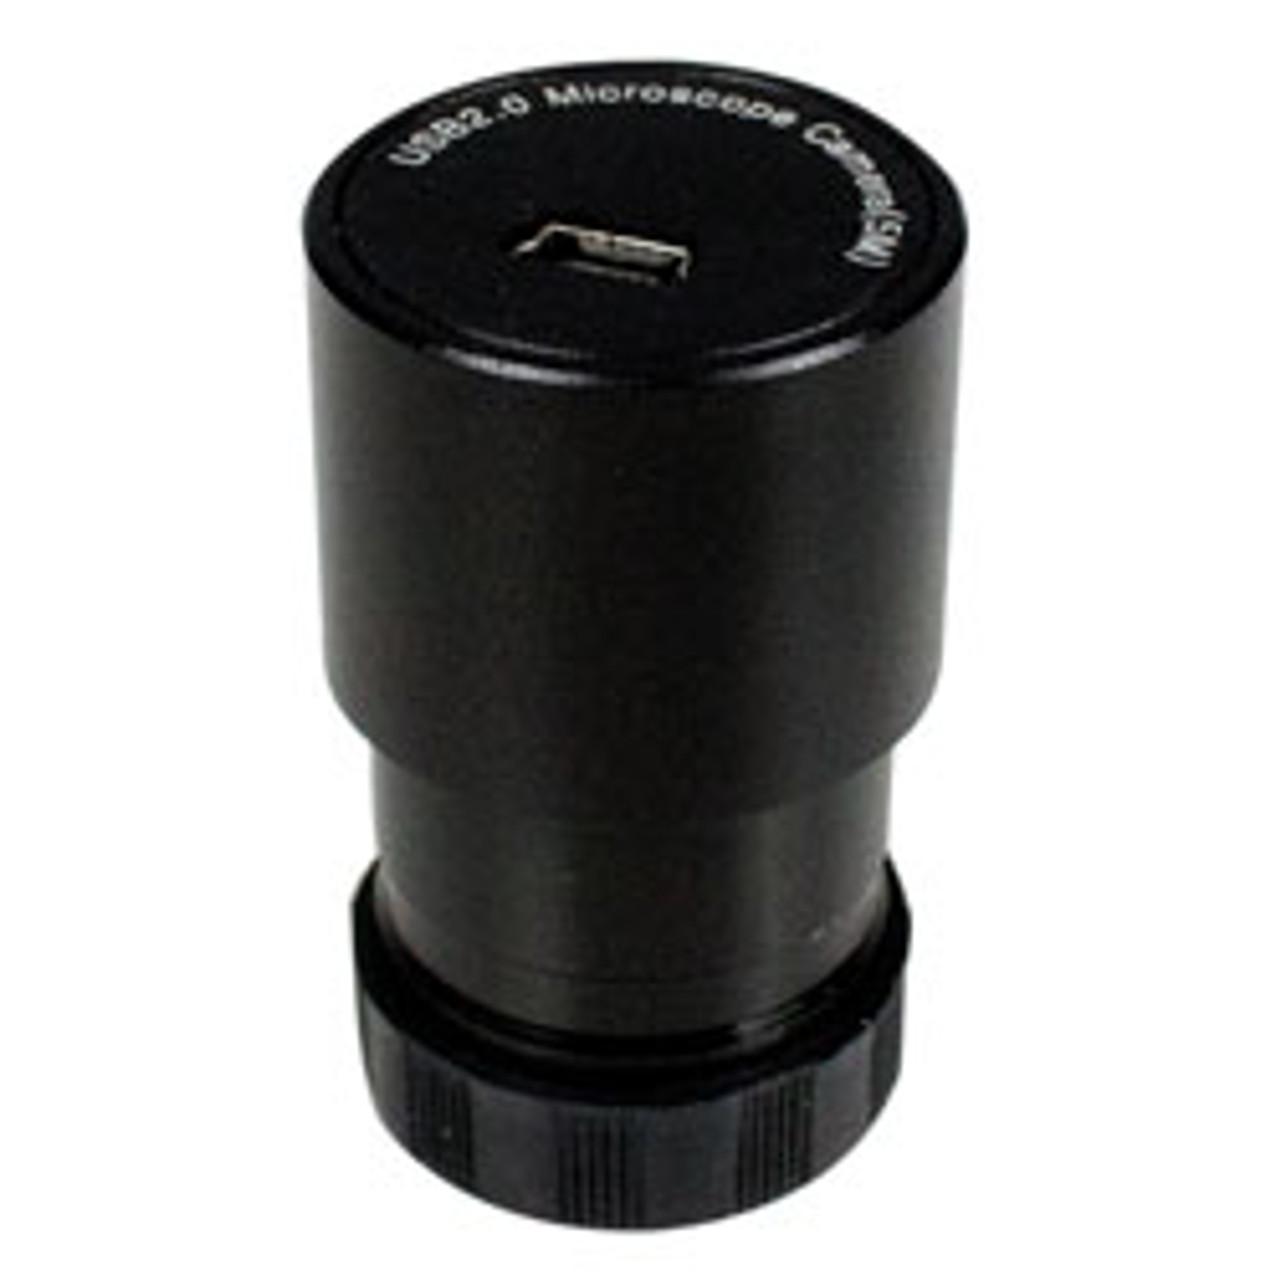 Walter Products 2MP Industrial Built-In Eyepiece Camera